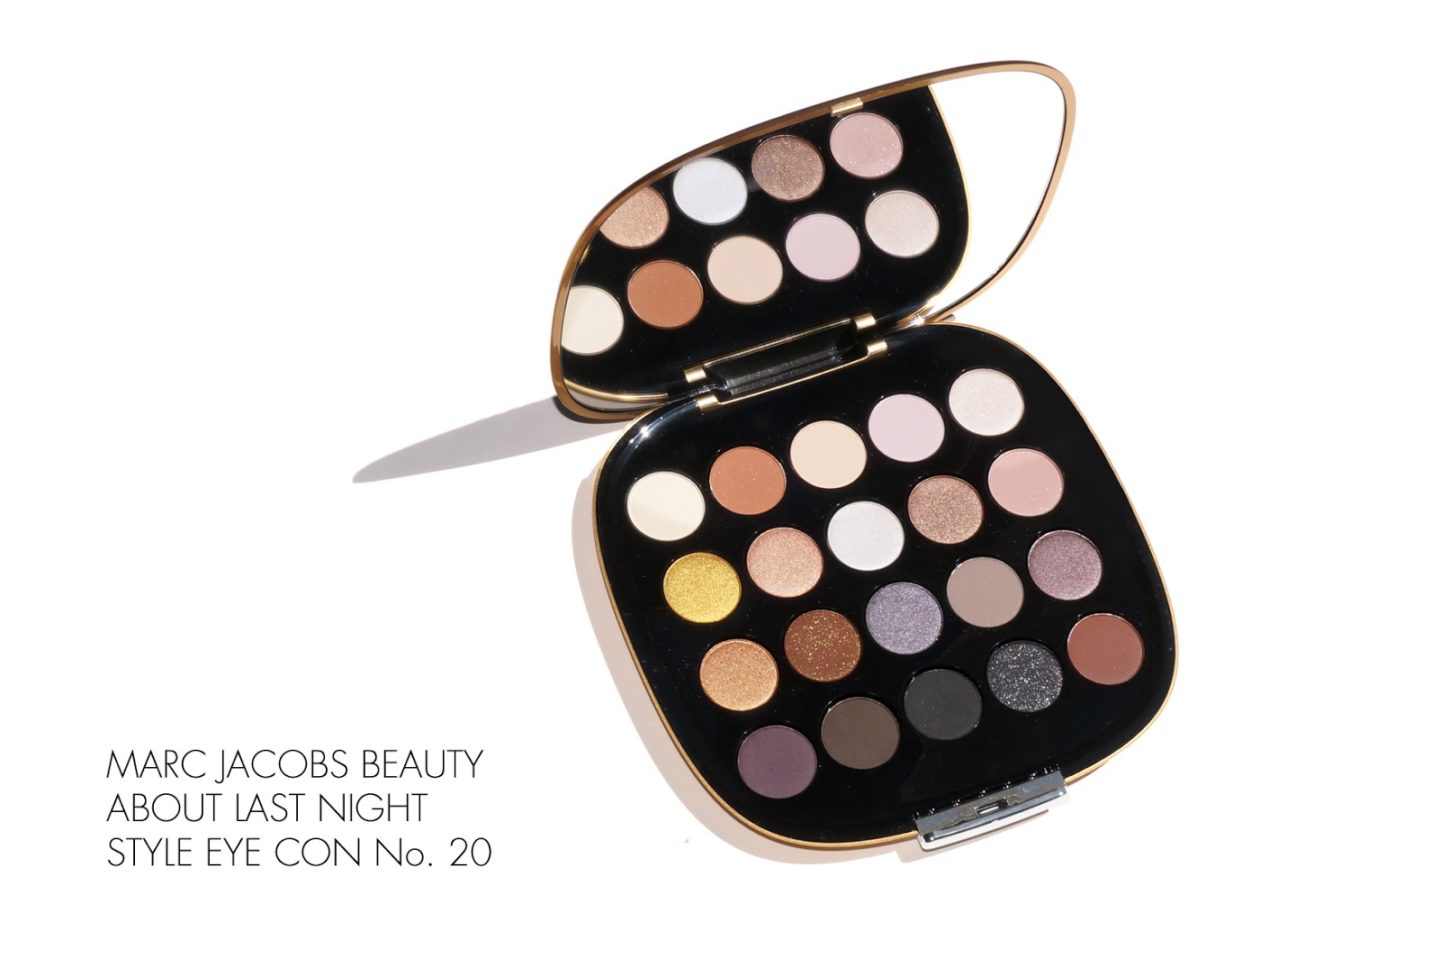 The Beauty Look Book - Marc Jacobs Beauty About Last Night Style Eye Con No 20 Eyeshadow Palette